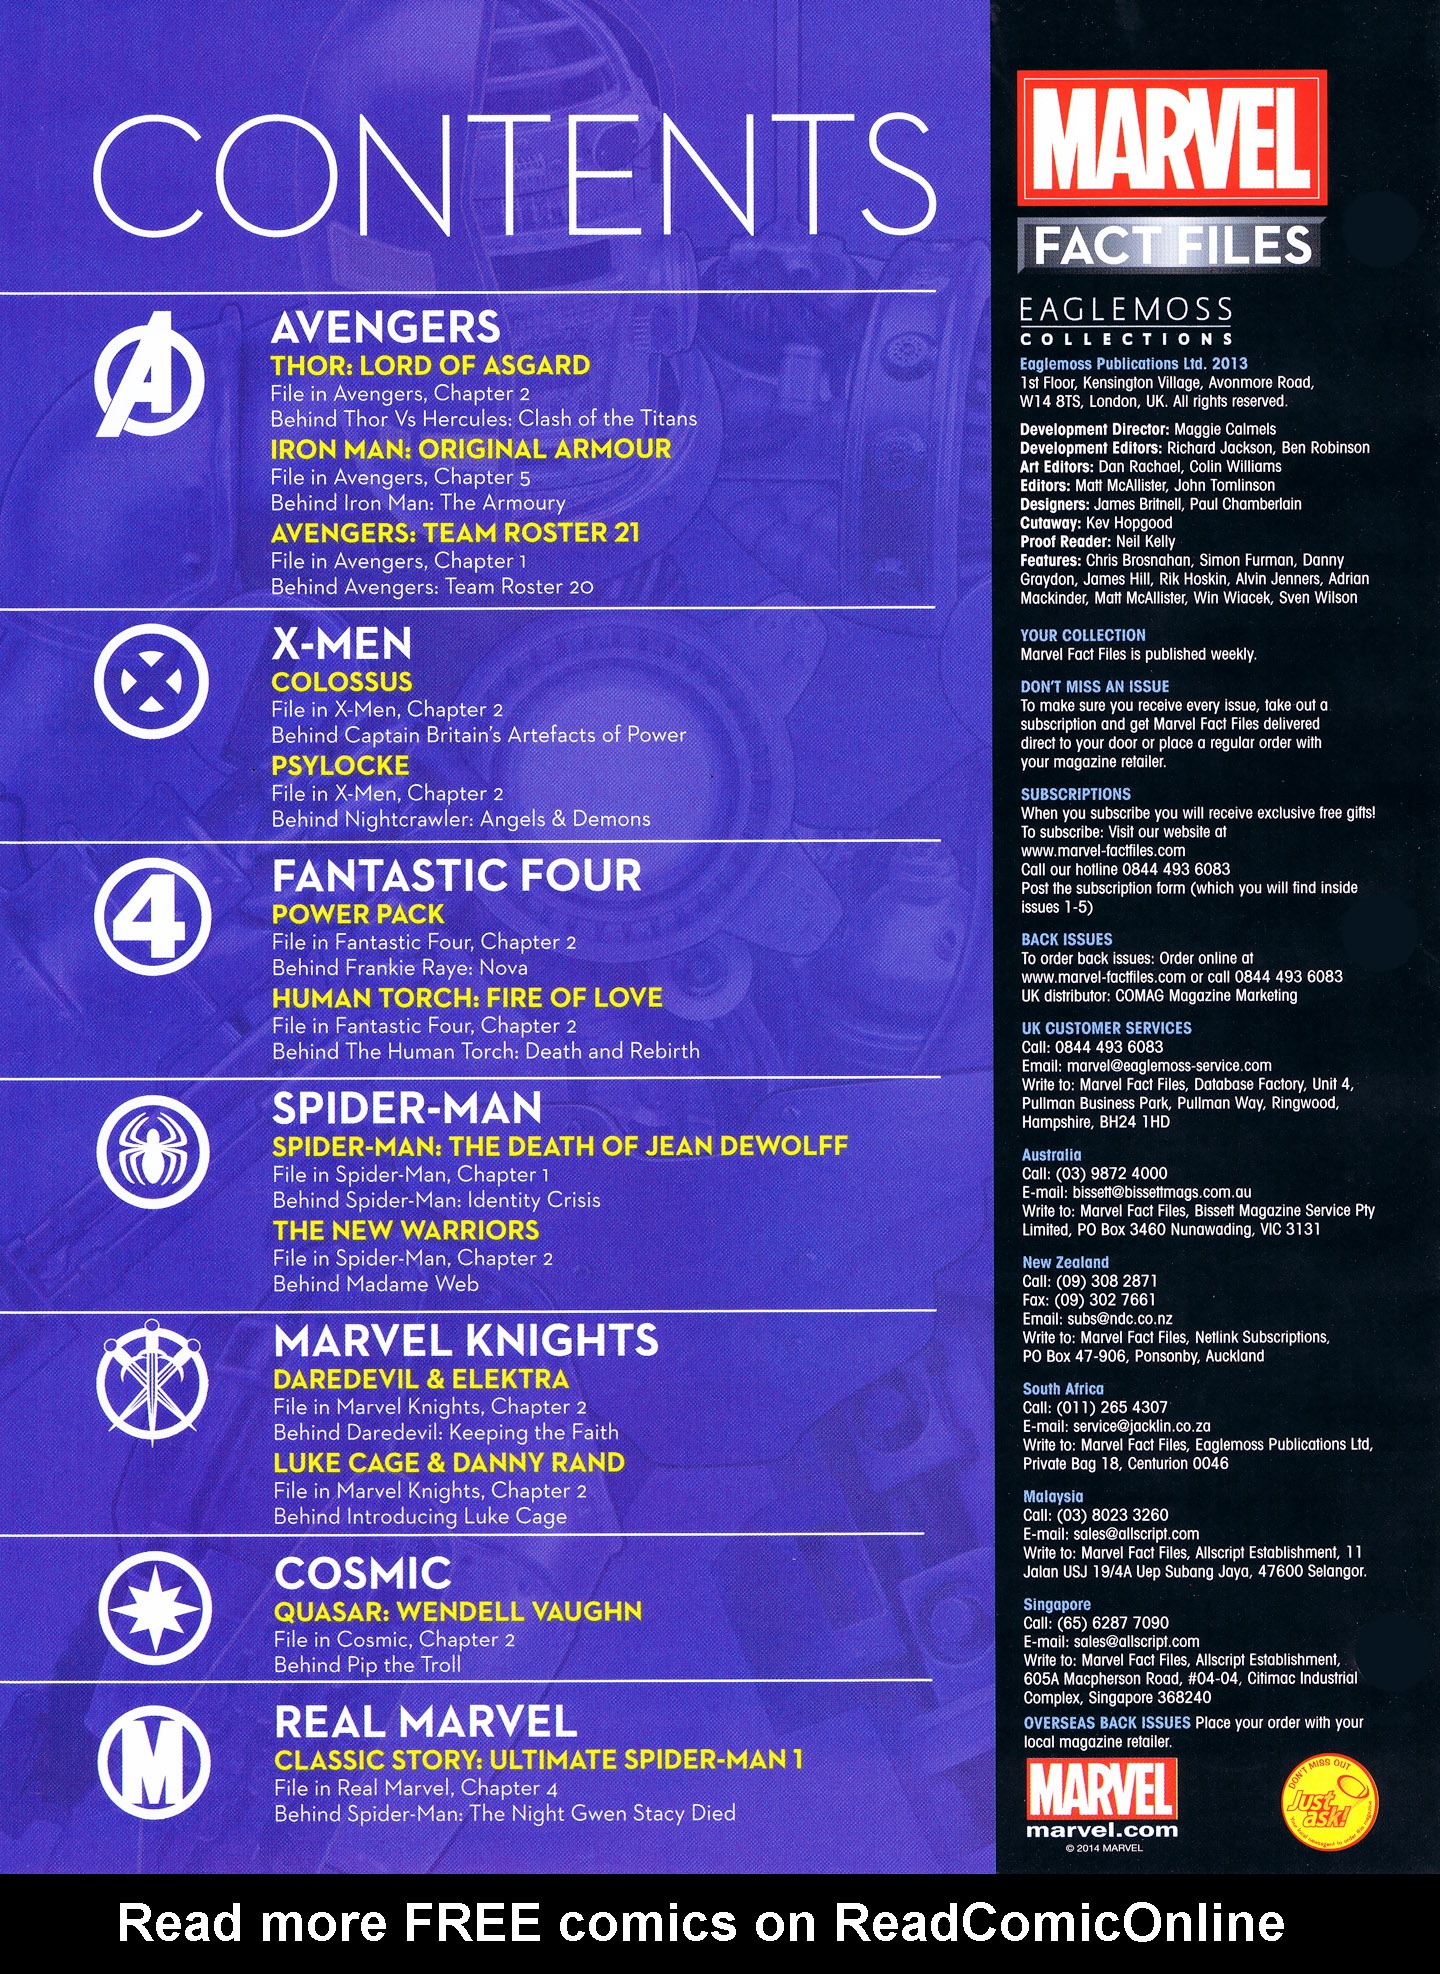 Read online Marvel Fact Files comic -  Issue #48 - 3